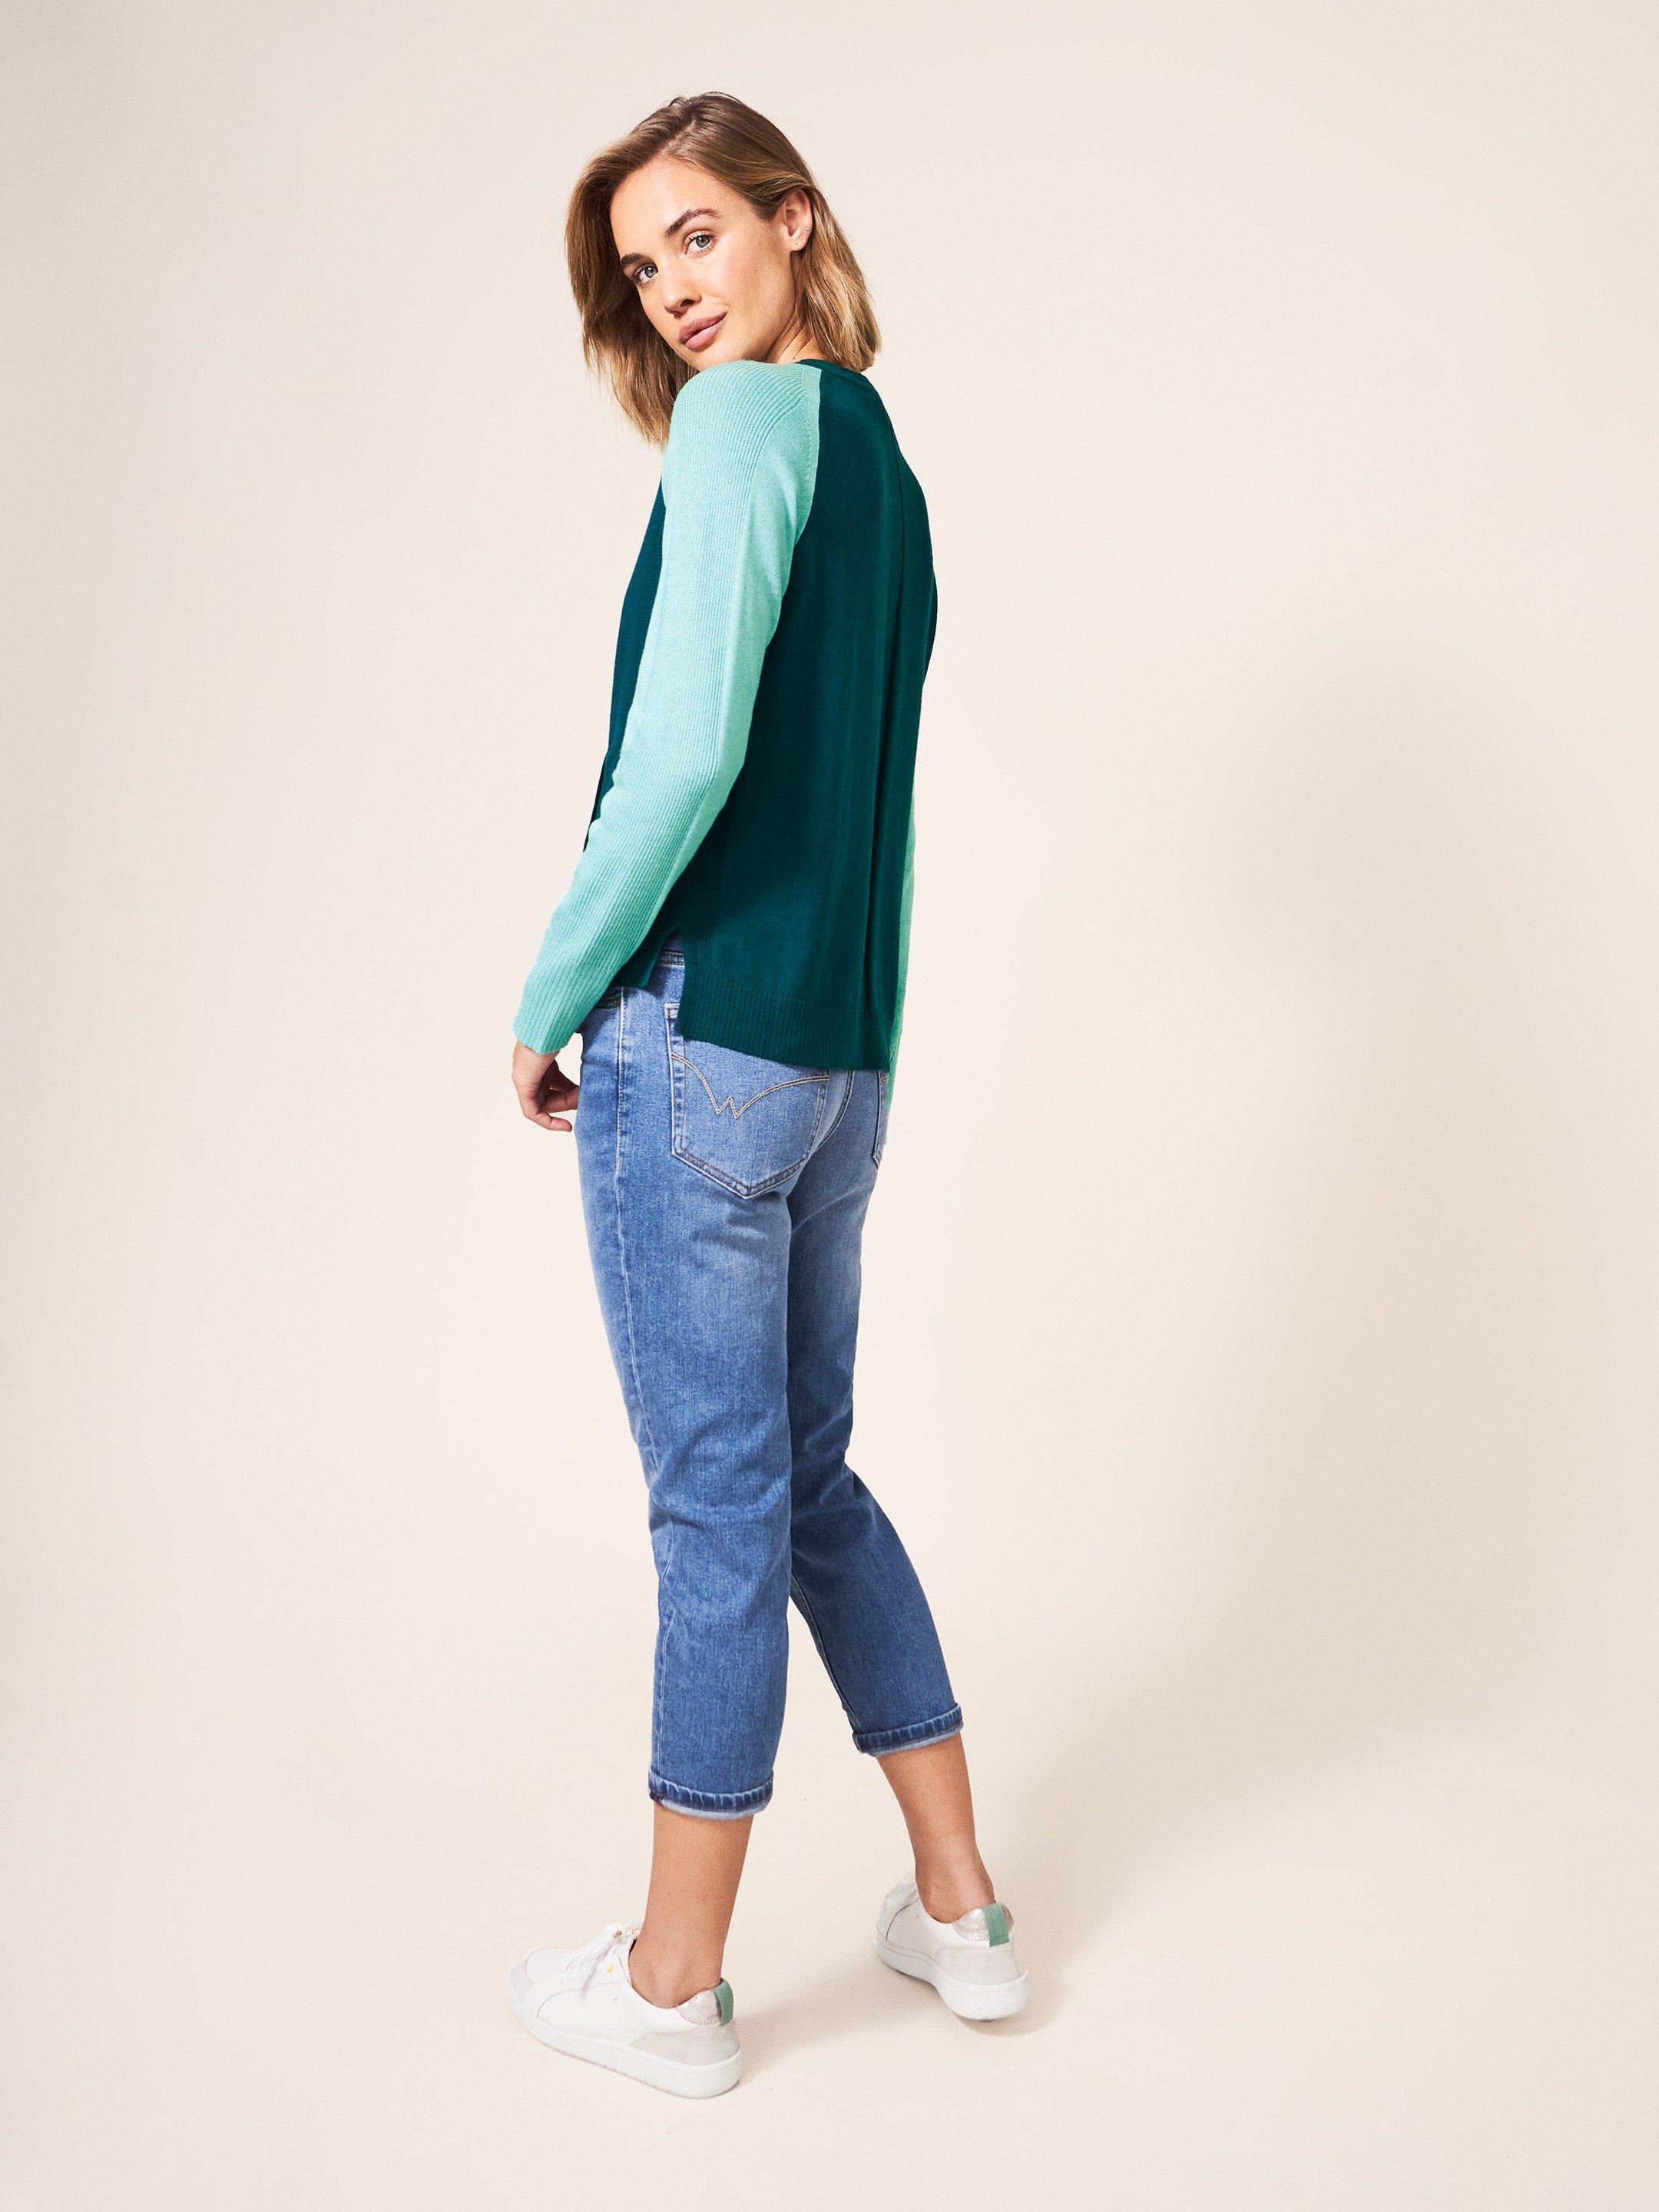 Libby Crew Neck Cardi in MID TEAL - MODEL BACK